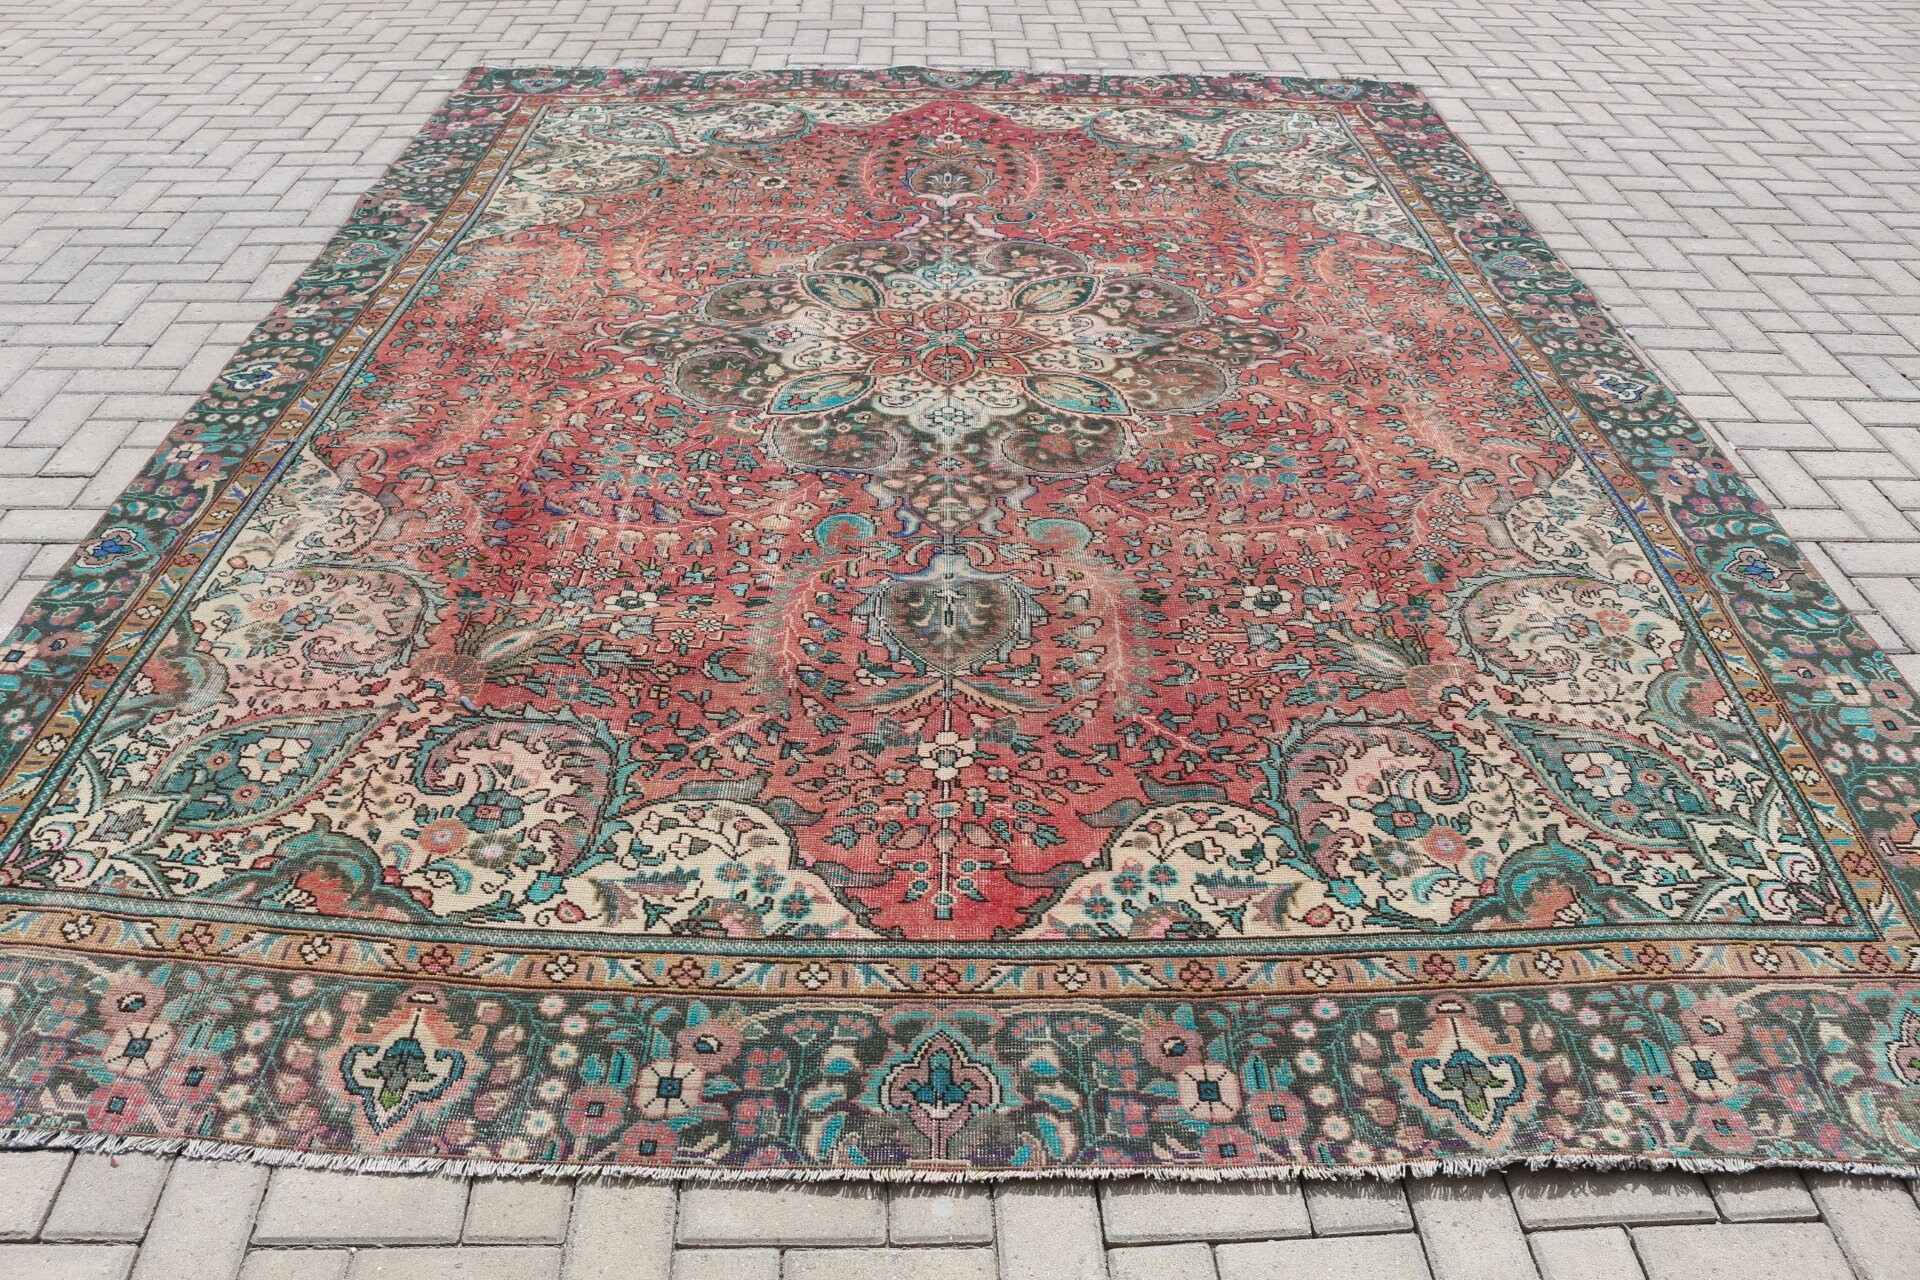 9x11.9 ft Oversize Rugs, Moroccan Rug, Red Cool Rug, Vintage Rug, Dining Room Rugs, Turkish Rug, Rugs for Salon, Antique Rug, Salon Rugs